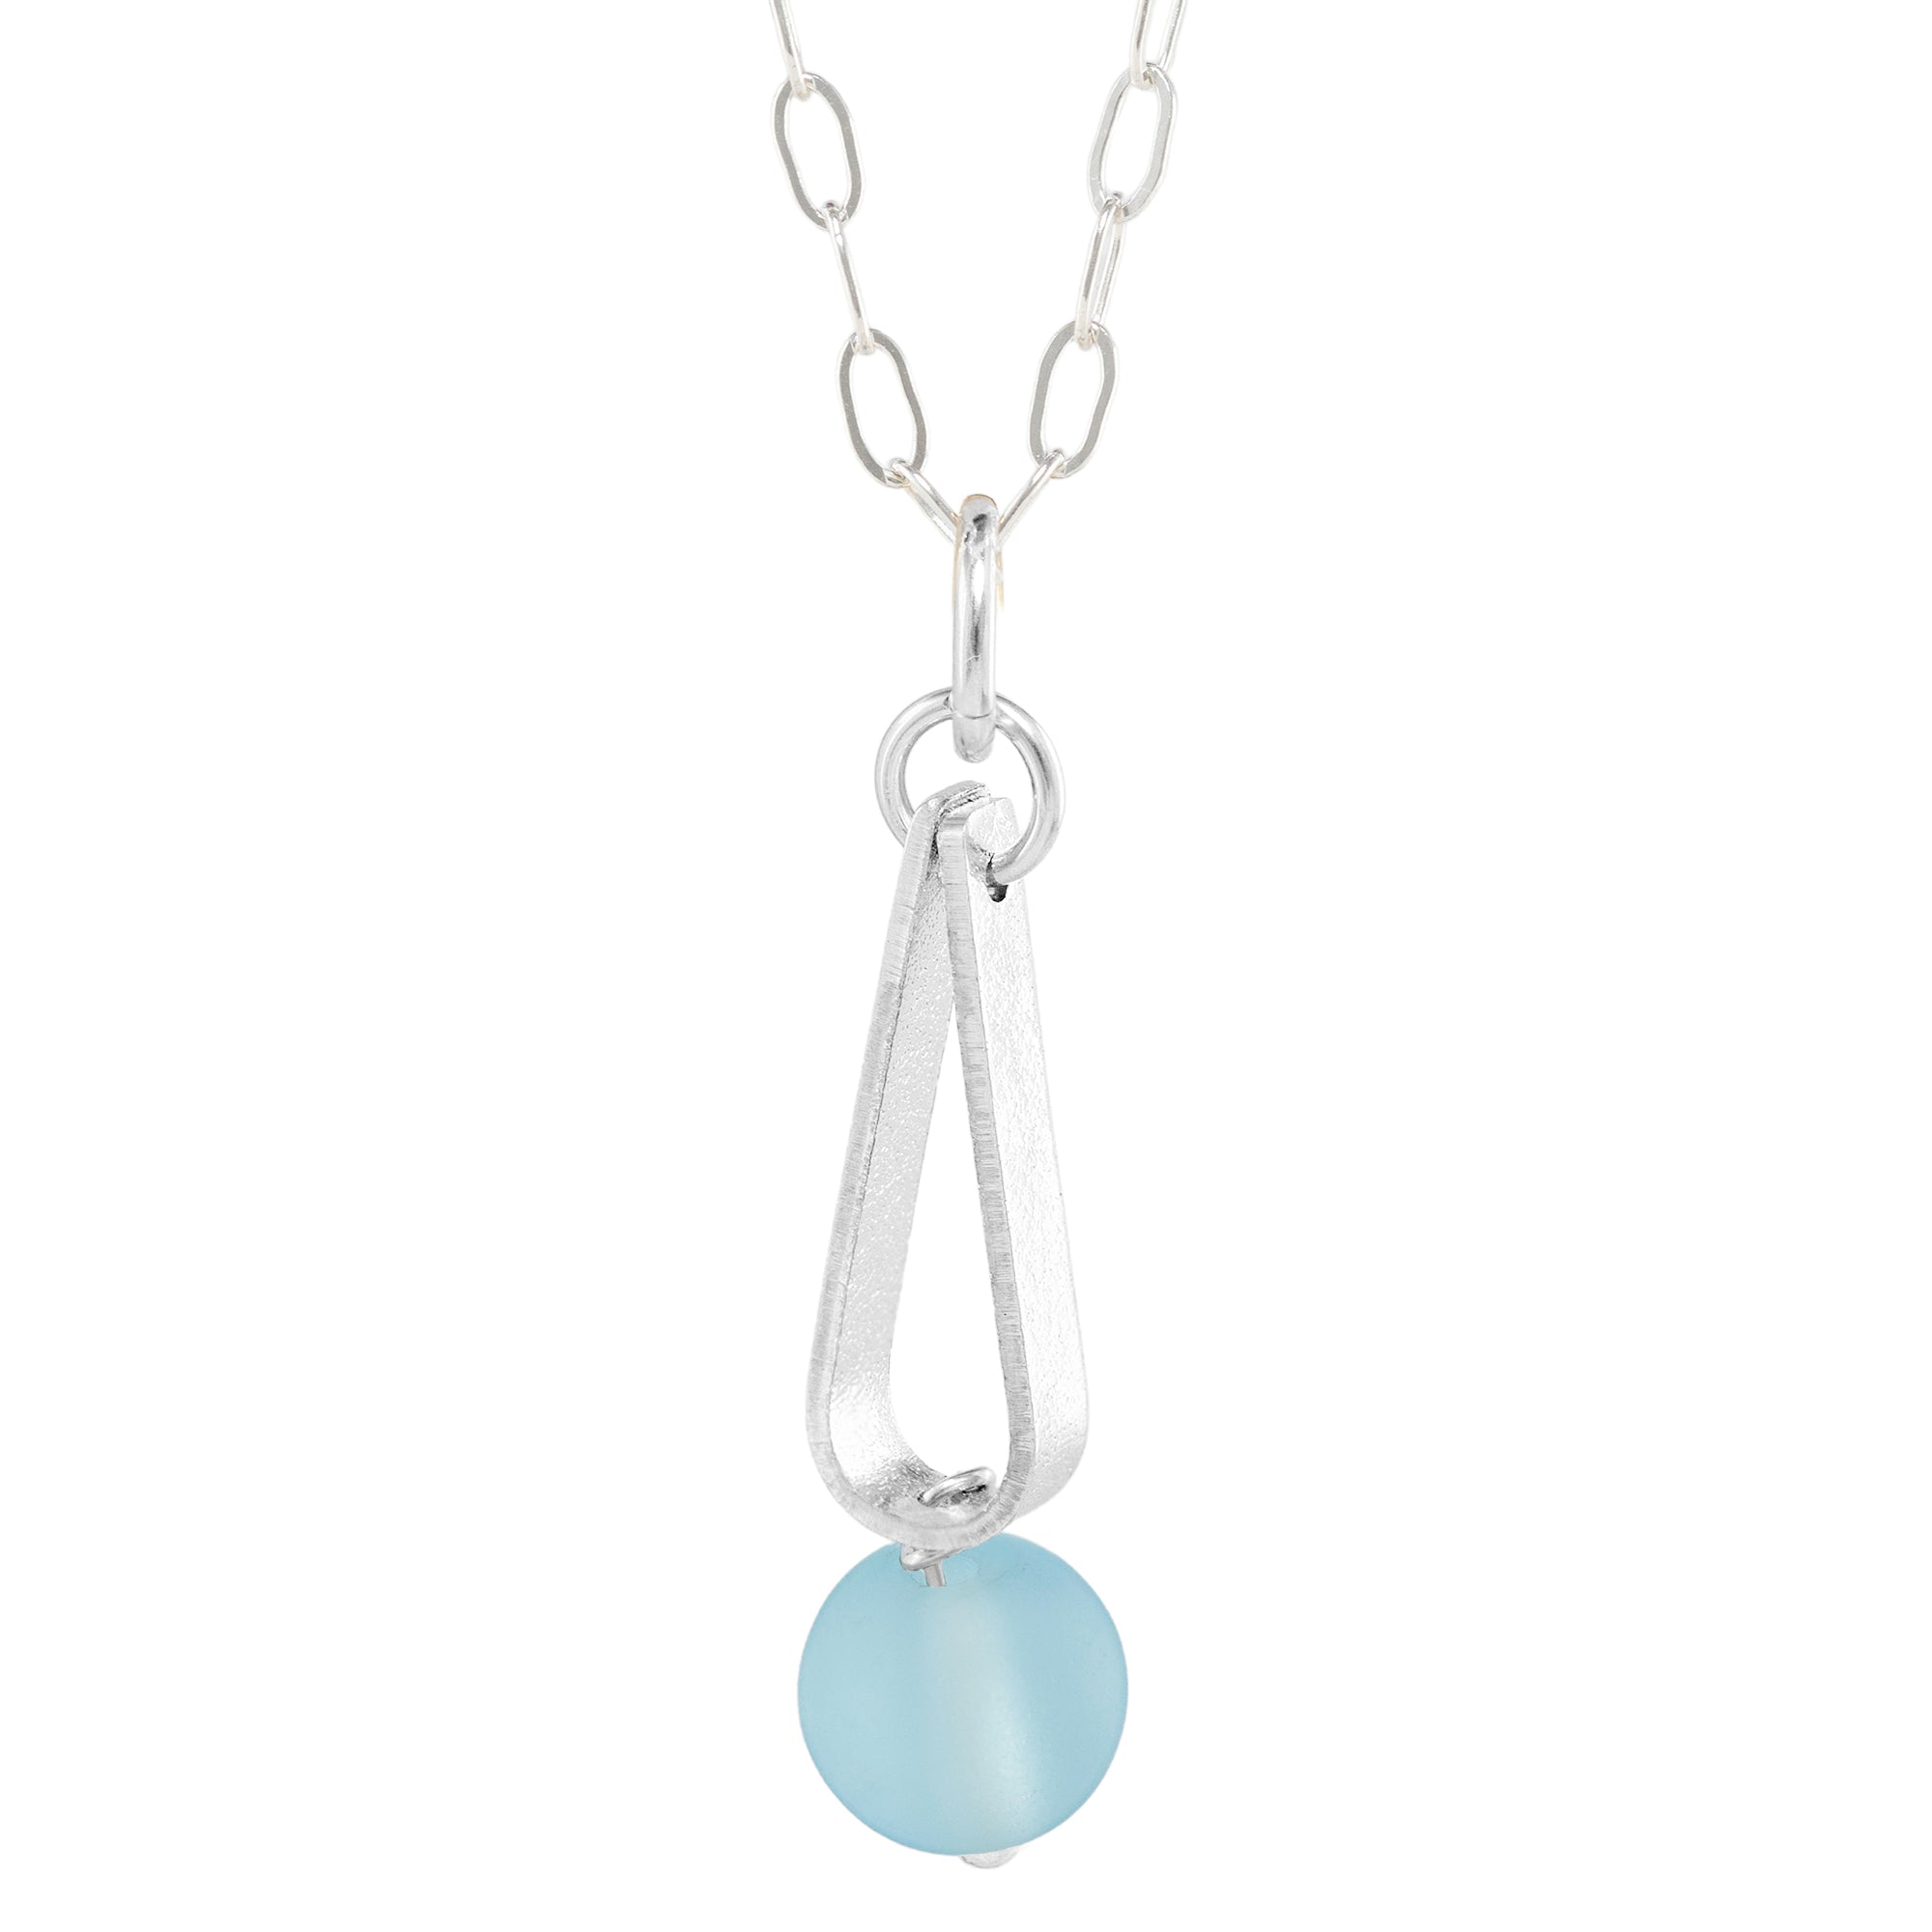 Light Baby Blue Round Recycled Glass Ball and Sterling Silver Teardrop Shaped Pendant Necklace